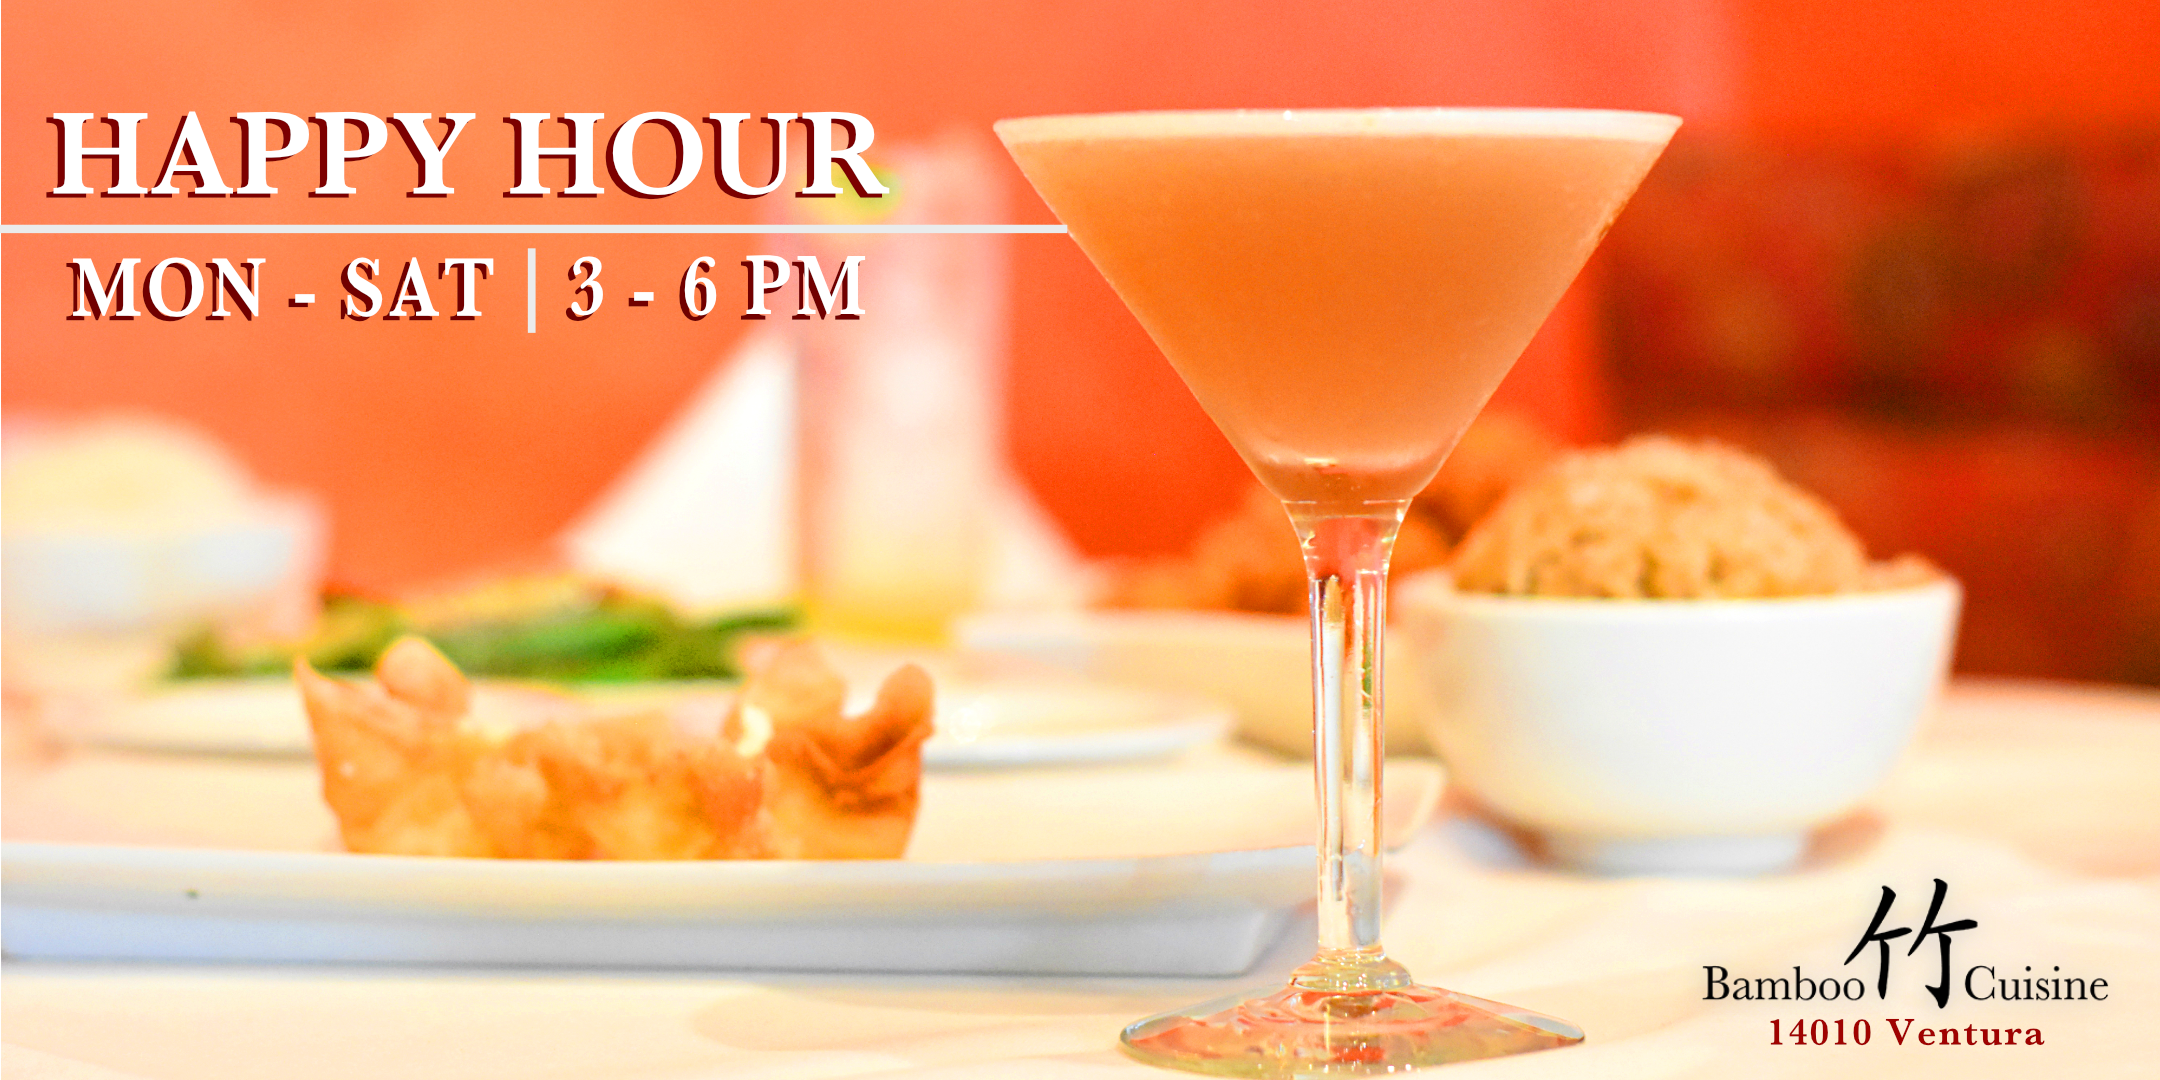 Happy Hour at Bamboo Cuisine!